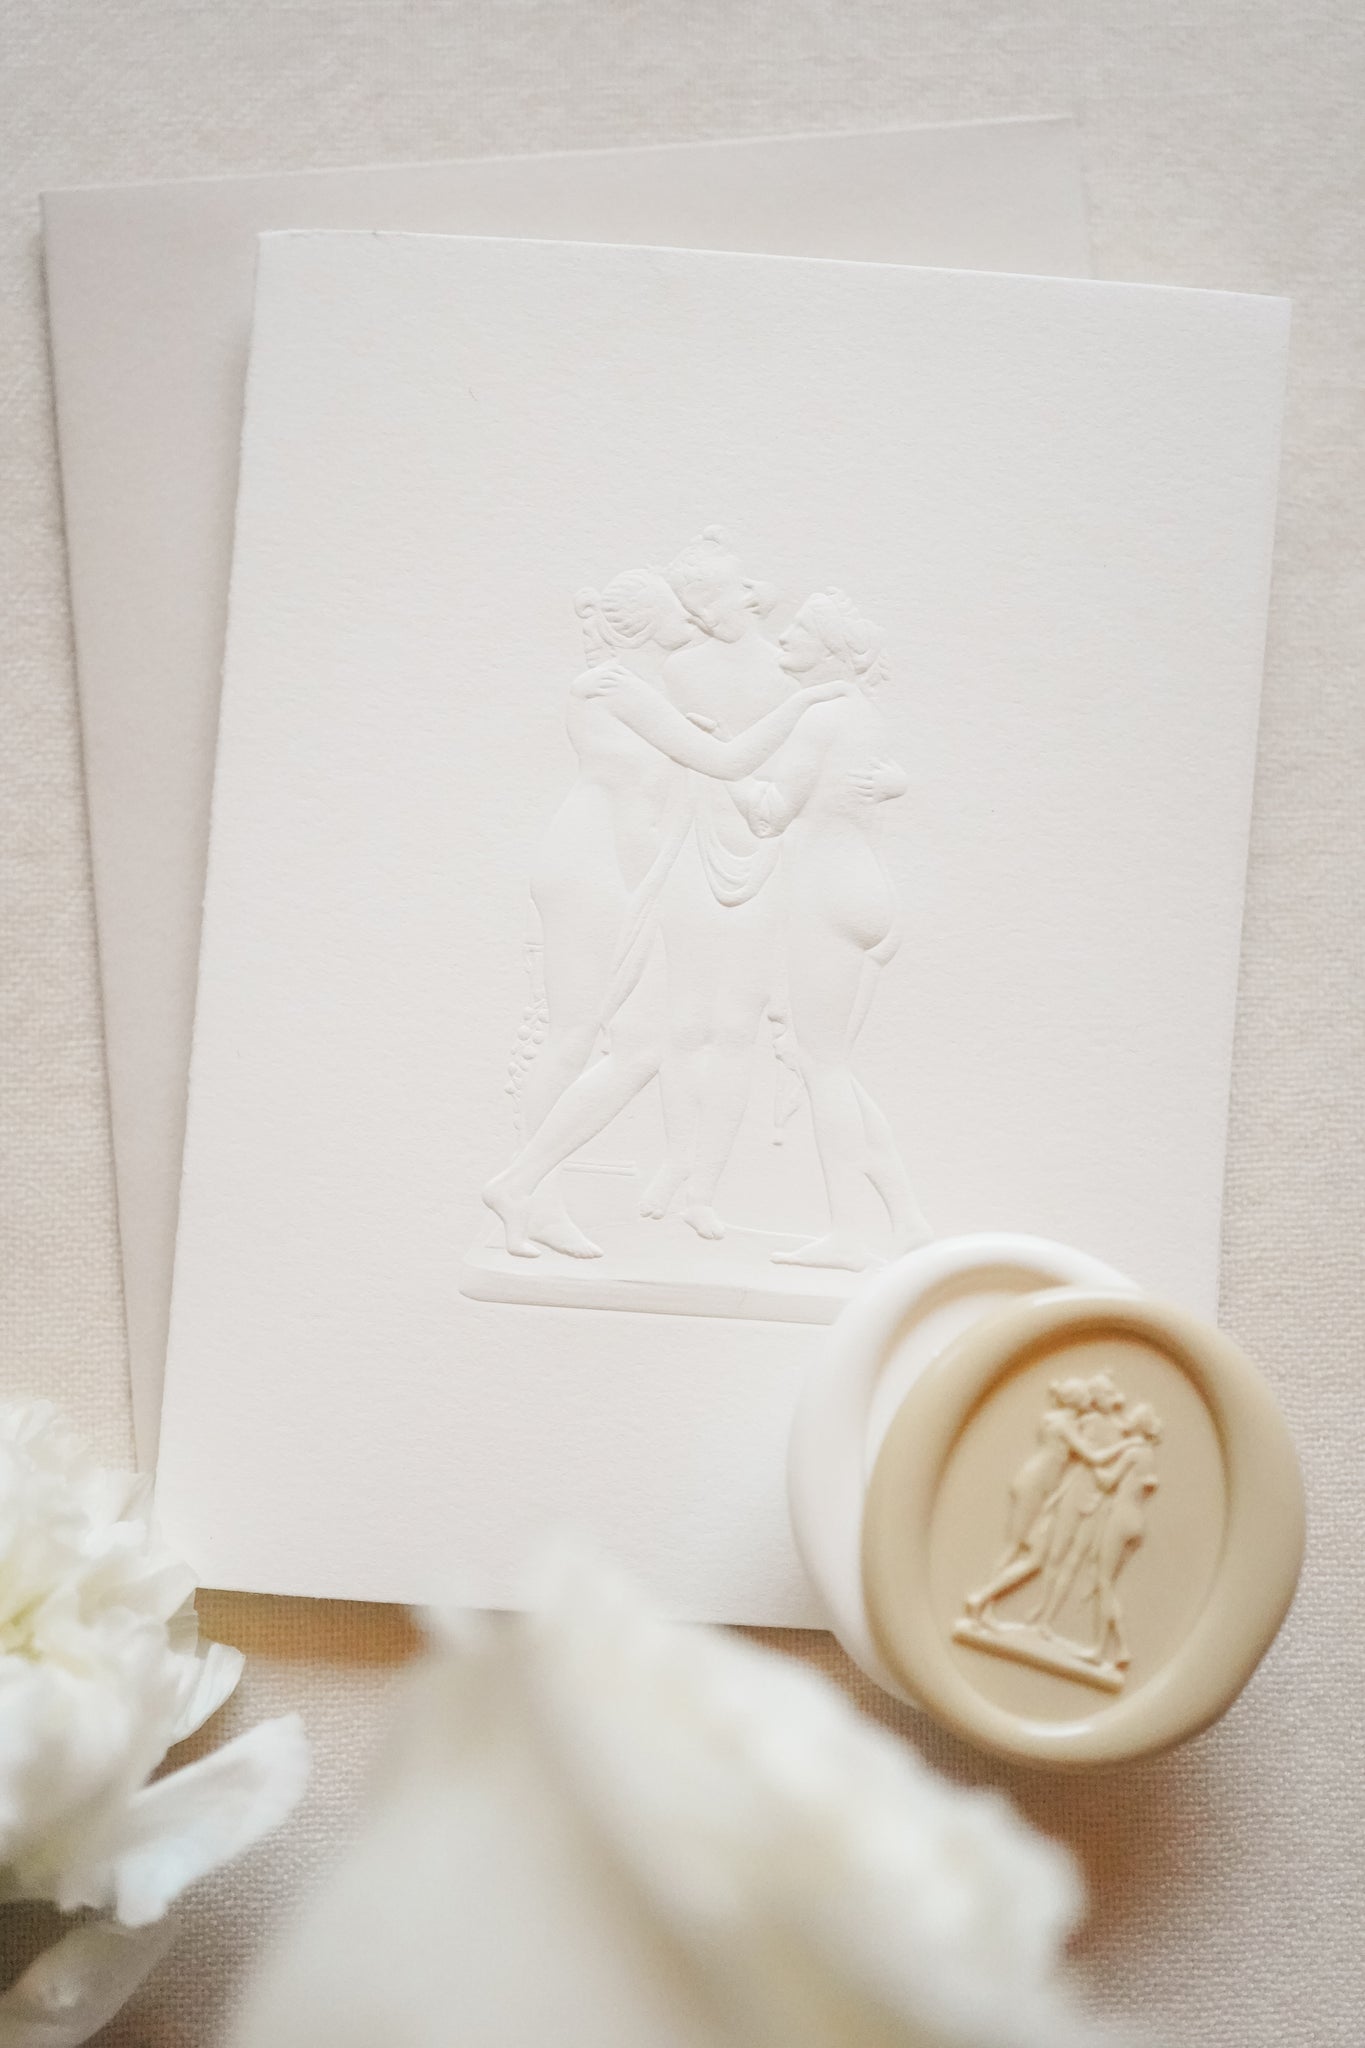 Three Graces Stationery and Seal Set by Clover and Lamb and Kathryn Hastings